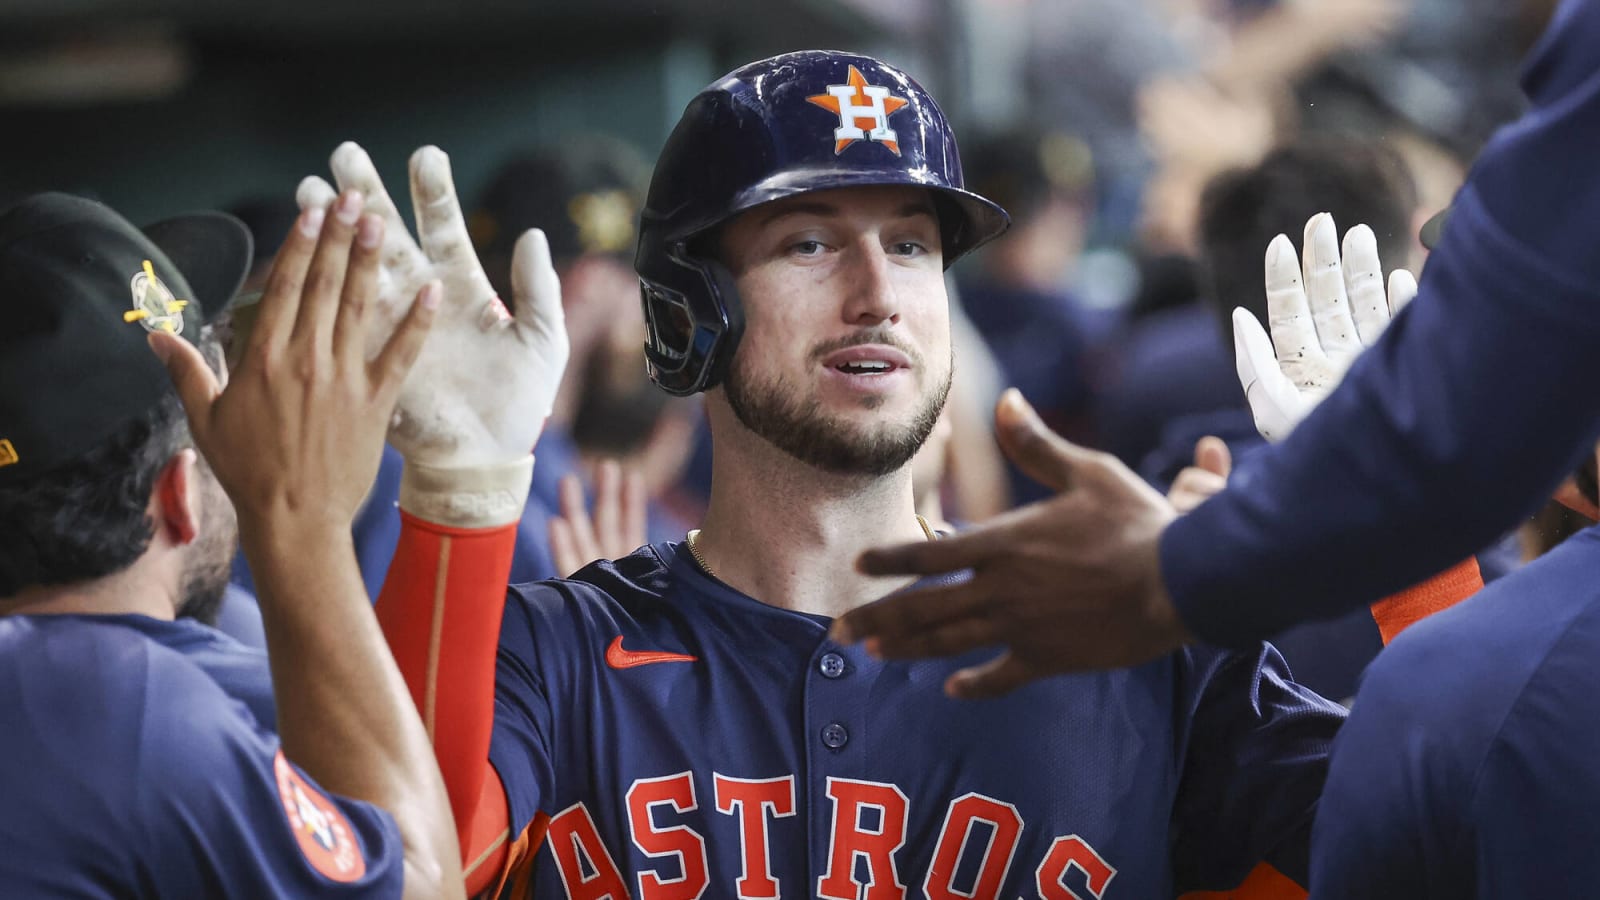 Look of the Day for 5/20: Astros to stay hot